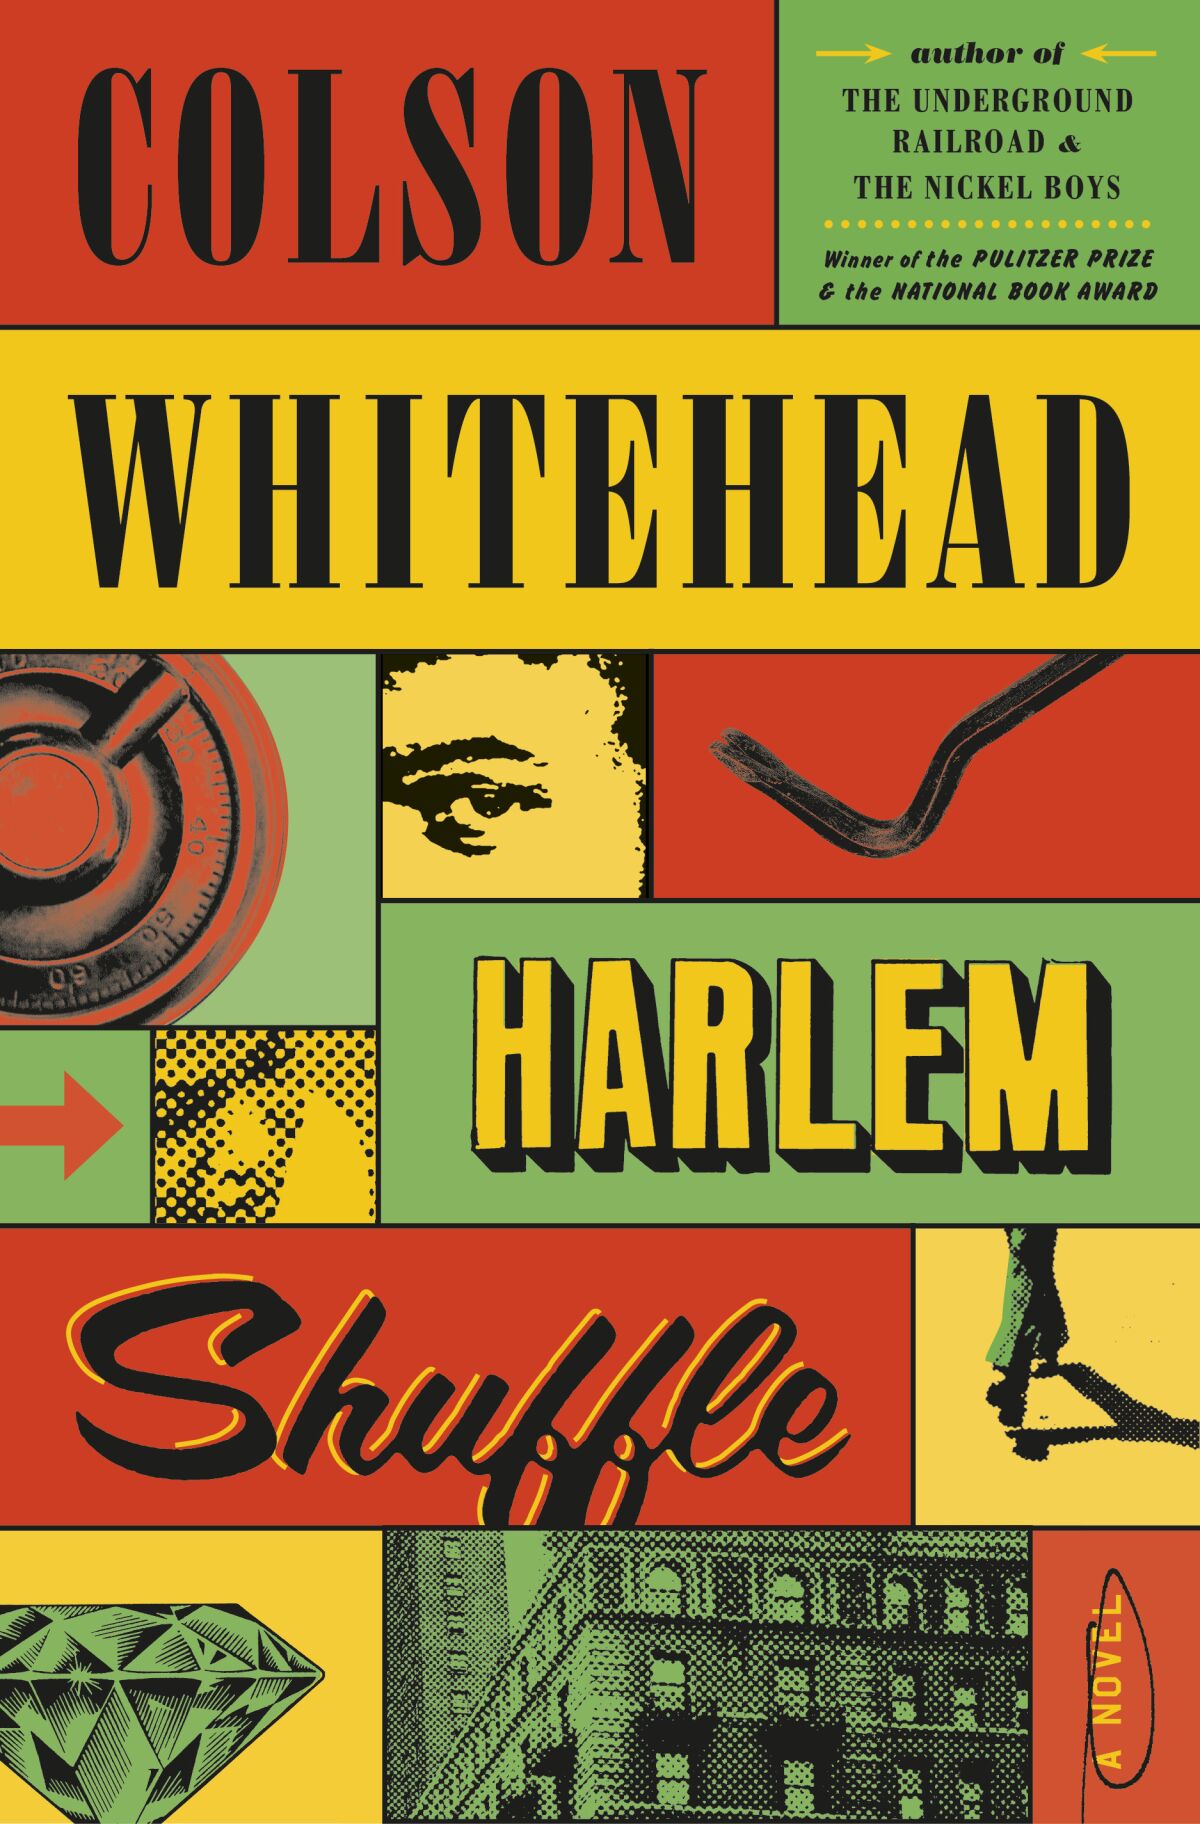 The book "Harlem Shuffle," by Colson Whitehead